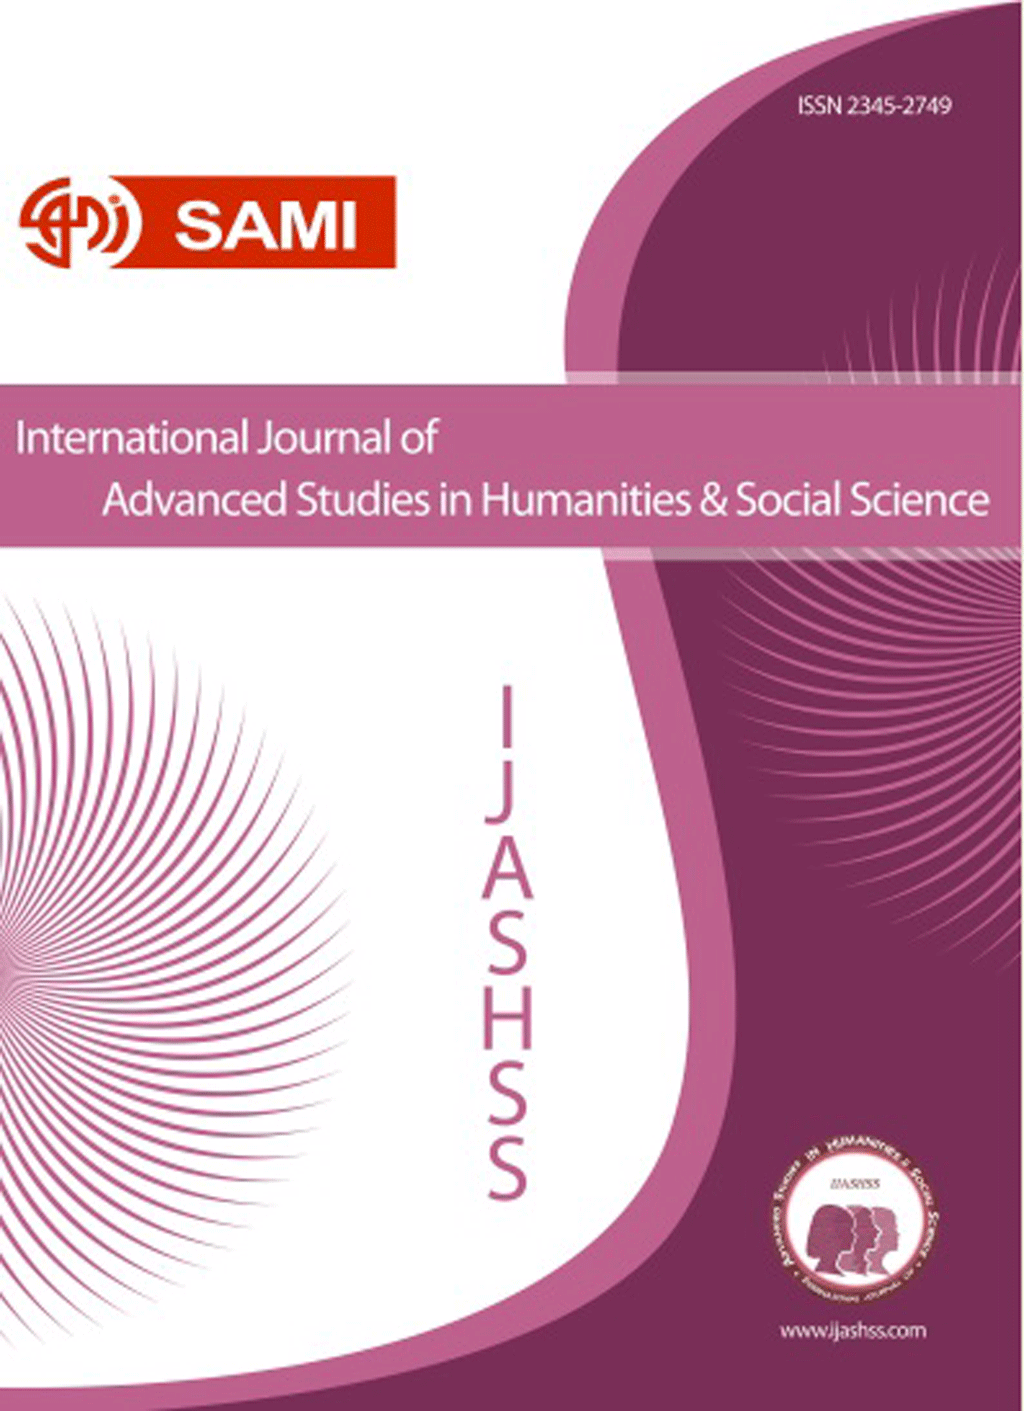 International Journal of Advanced Studies in Humanities and Social Science - October 2016, Volume 5 -  Issue 4